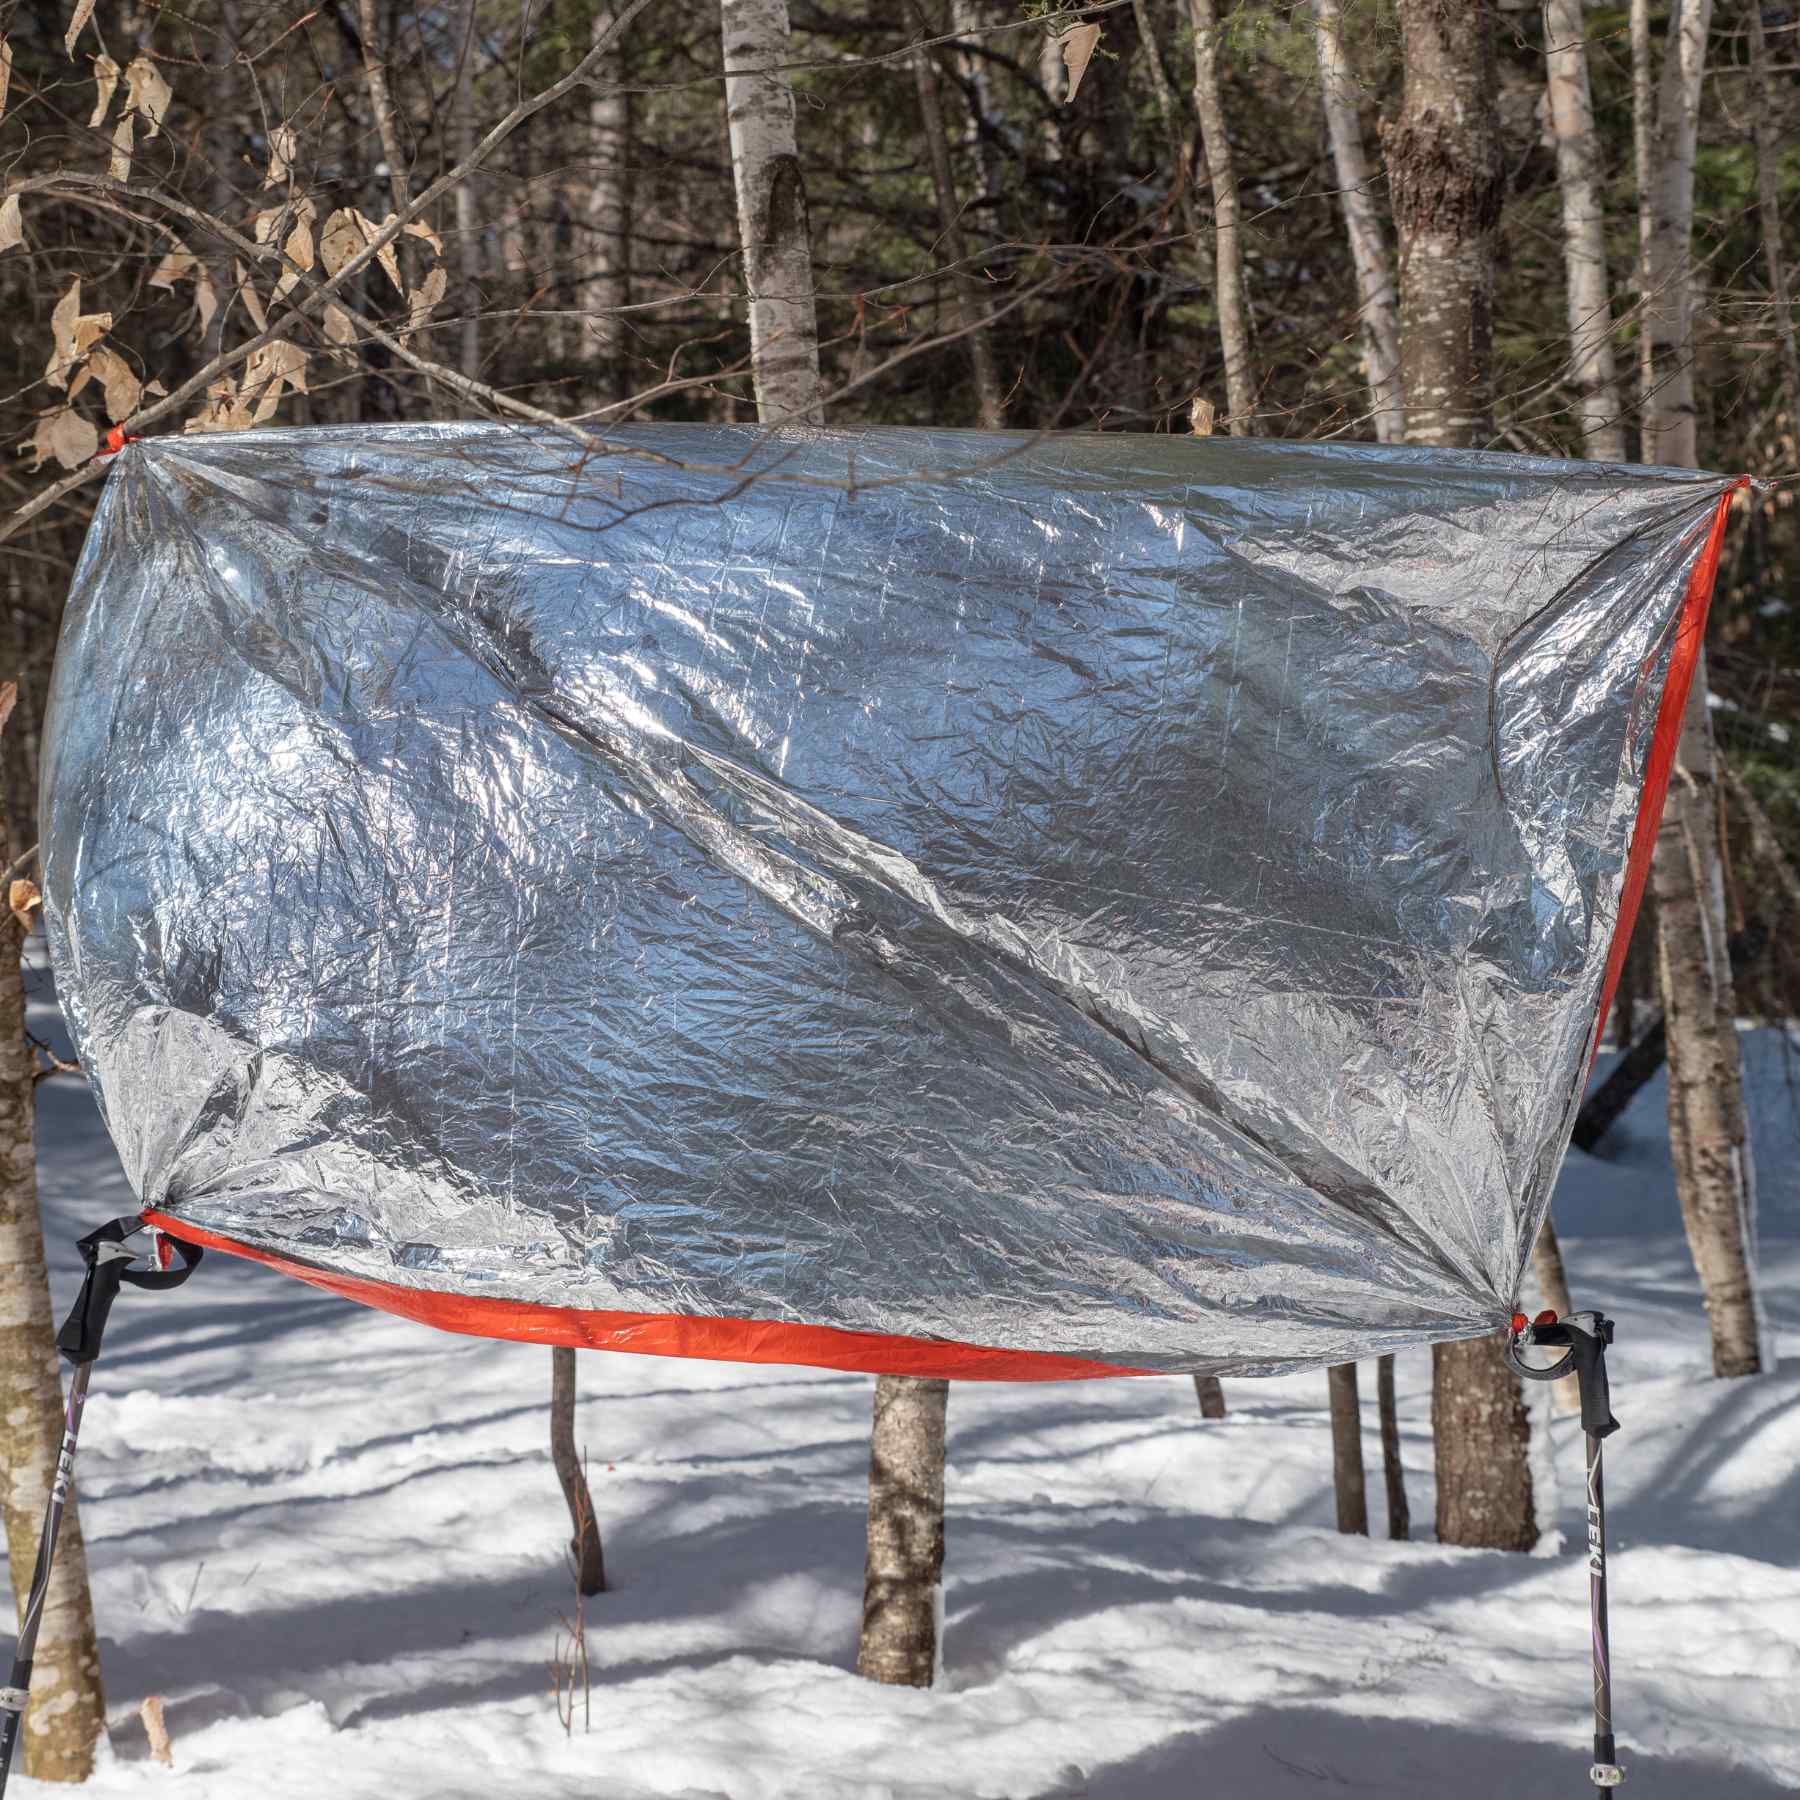 BESPORTBLE Space Blanket Heat Insulation Blankets for Outside Reusable  Blanket Thermal Blanket Camping Emergency Blankets Tent for Camping  Survival